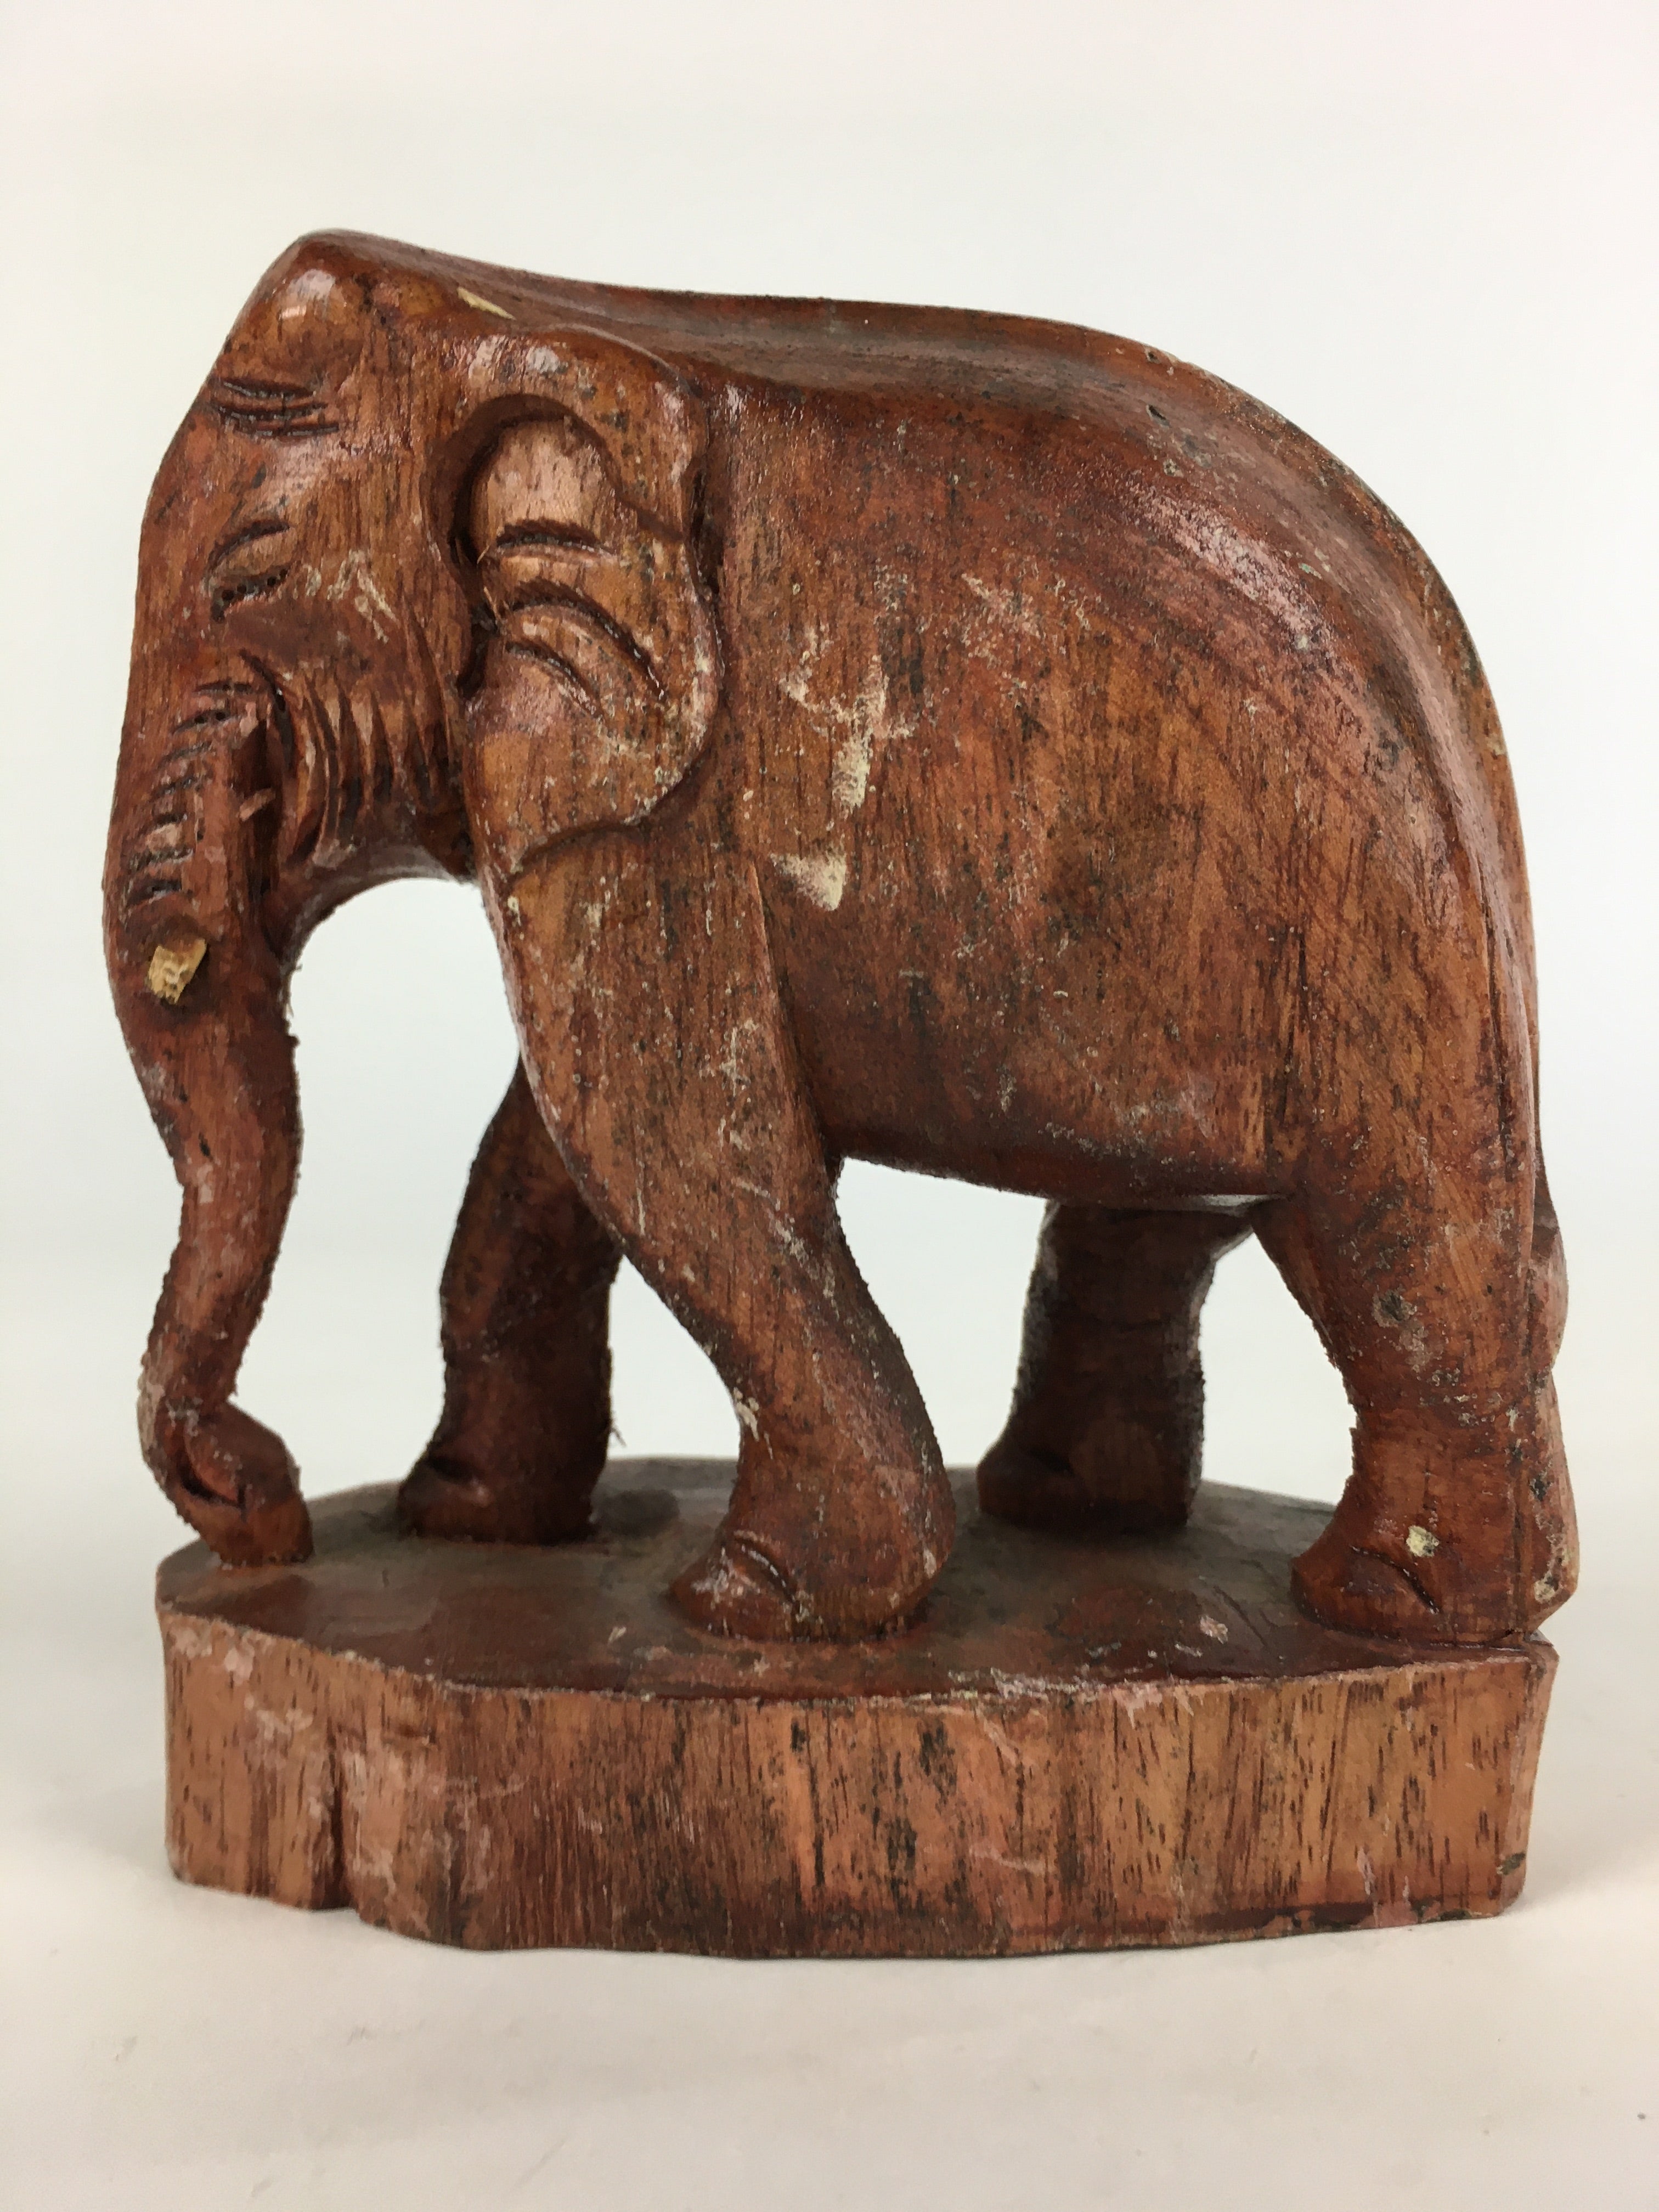 Japanese Wooden Elephant Statue Vtg Wood Carving Hand-Crafted Brown BD819